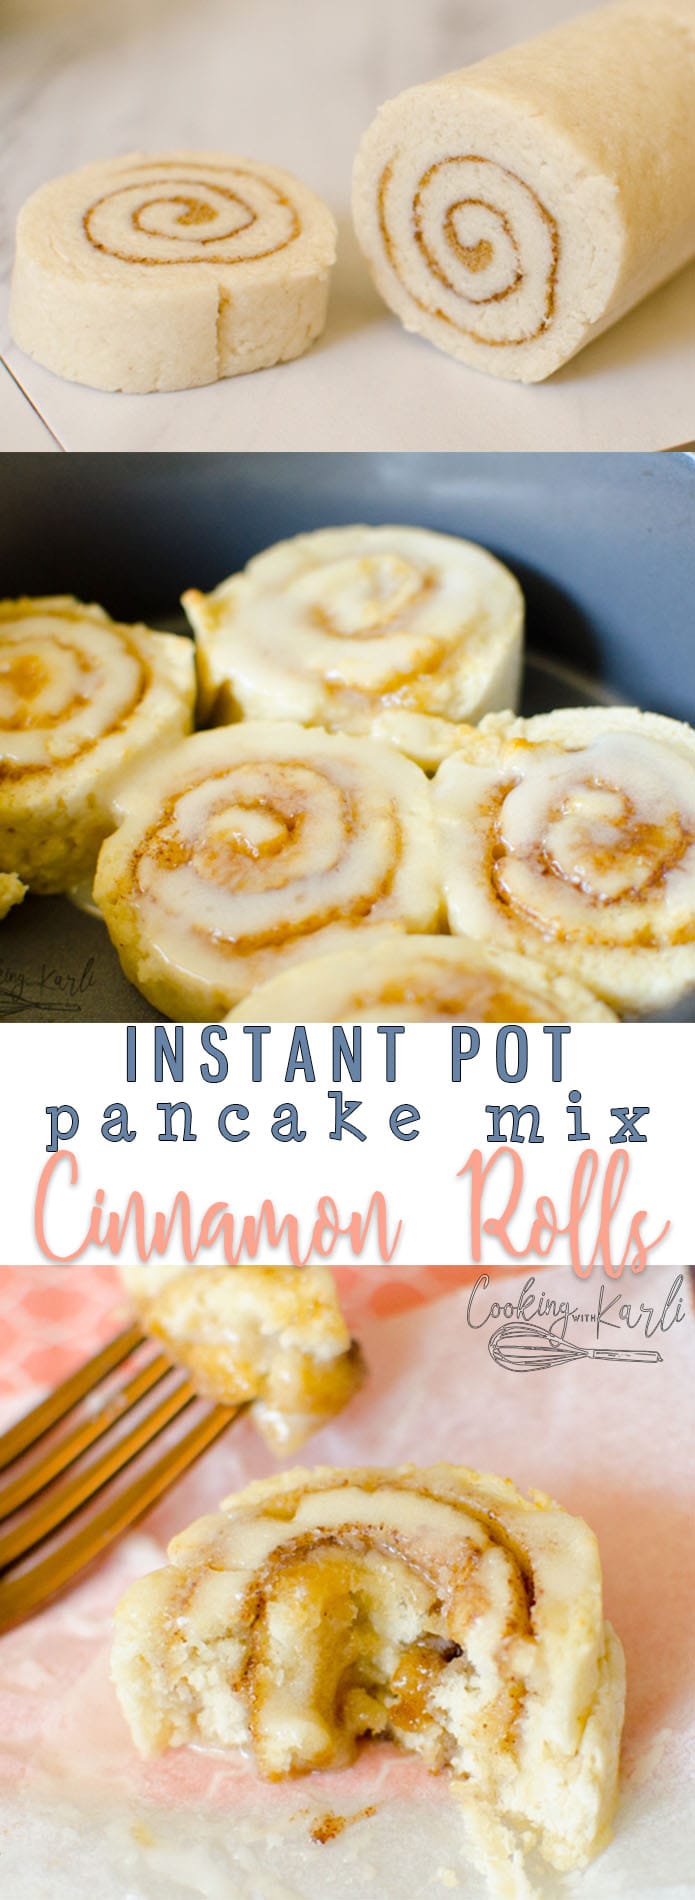 Pancake Mix Cinnamon Rolls are fast, easy and tasty! The dough is made from just three ingredients; pancake mix, sugar and milk. Cooking these in the Instant Pot keeps them soft and moist. Pancake Mix Cinnamon Rolls will be a new favorite treat! |Cooking with Karli| #instantpot #breakfast #pressurecooker #cinnamonrolls #pancakemix #hack #recipe